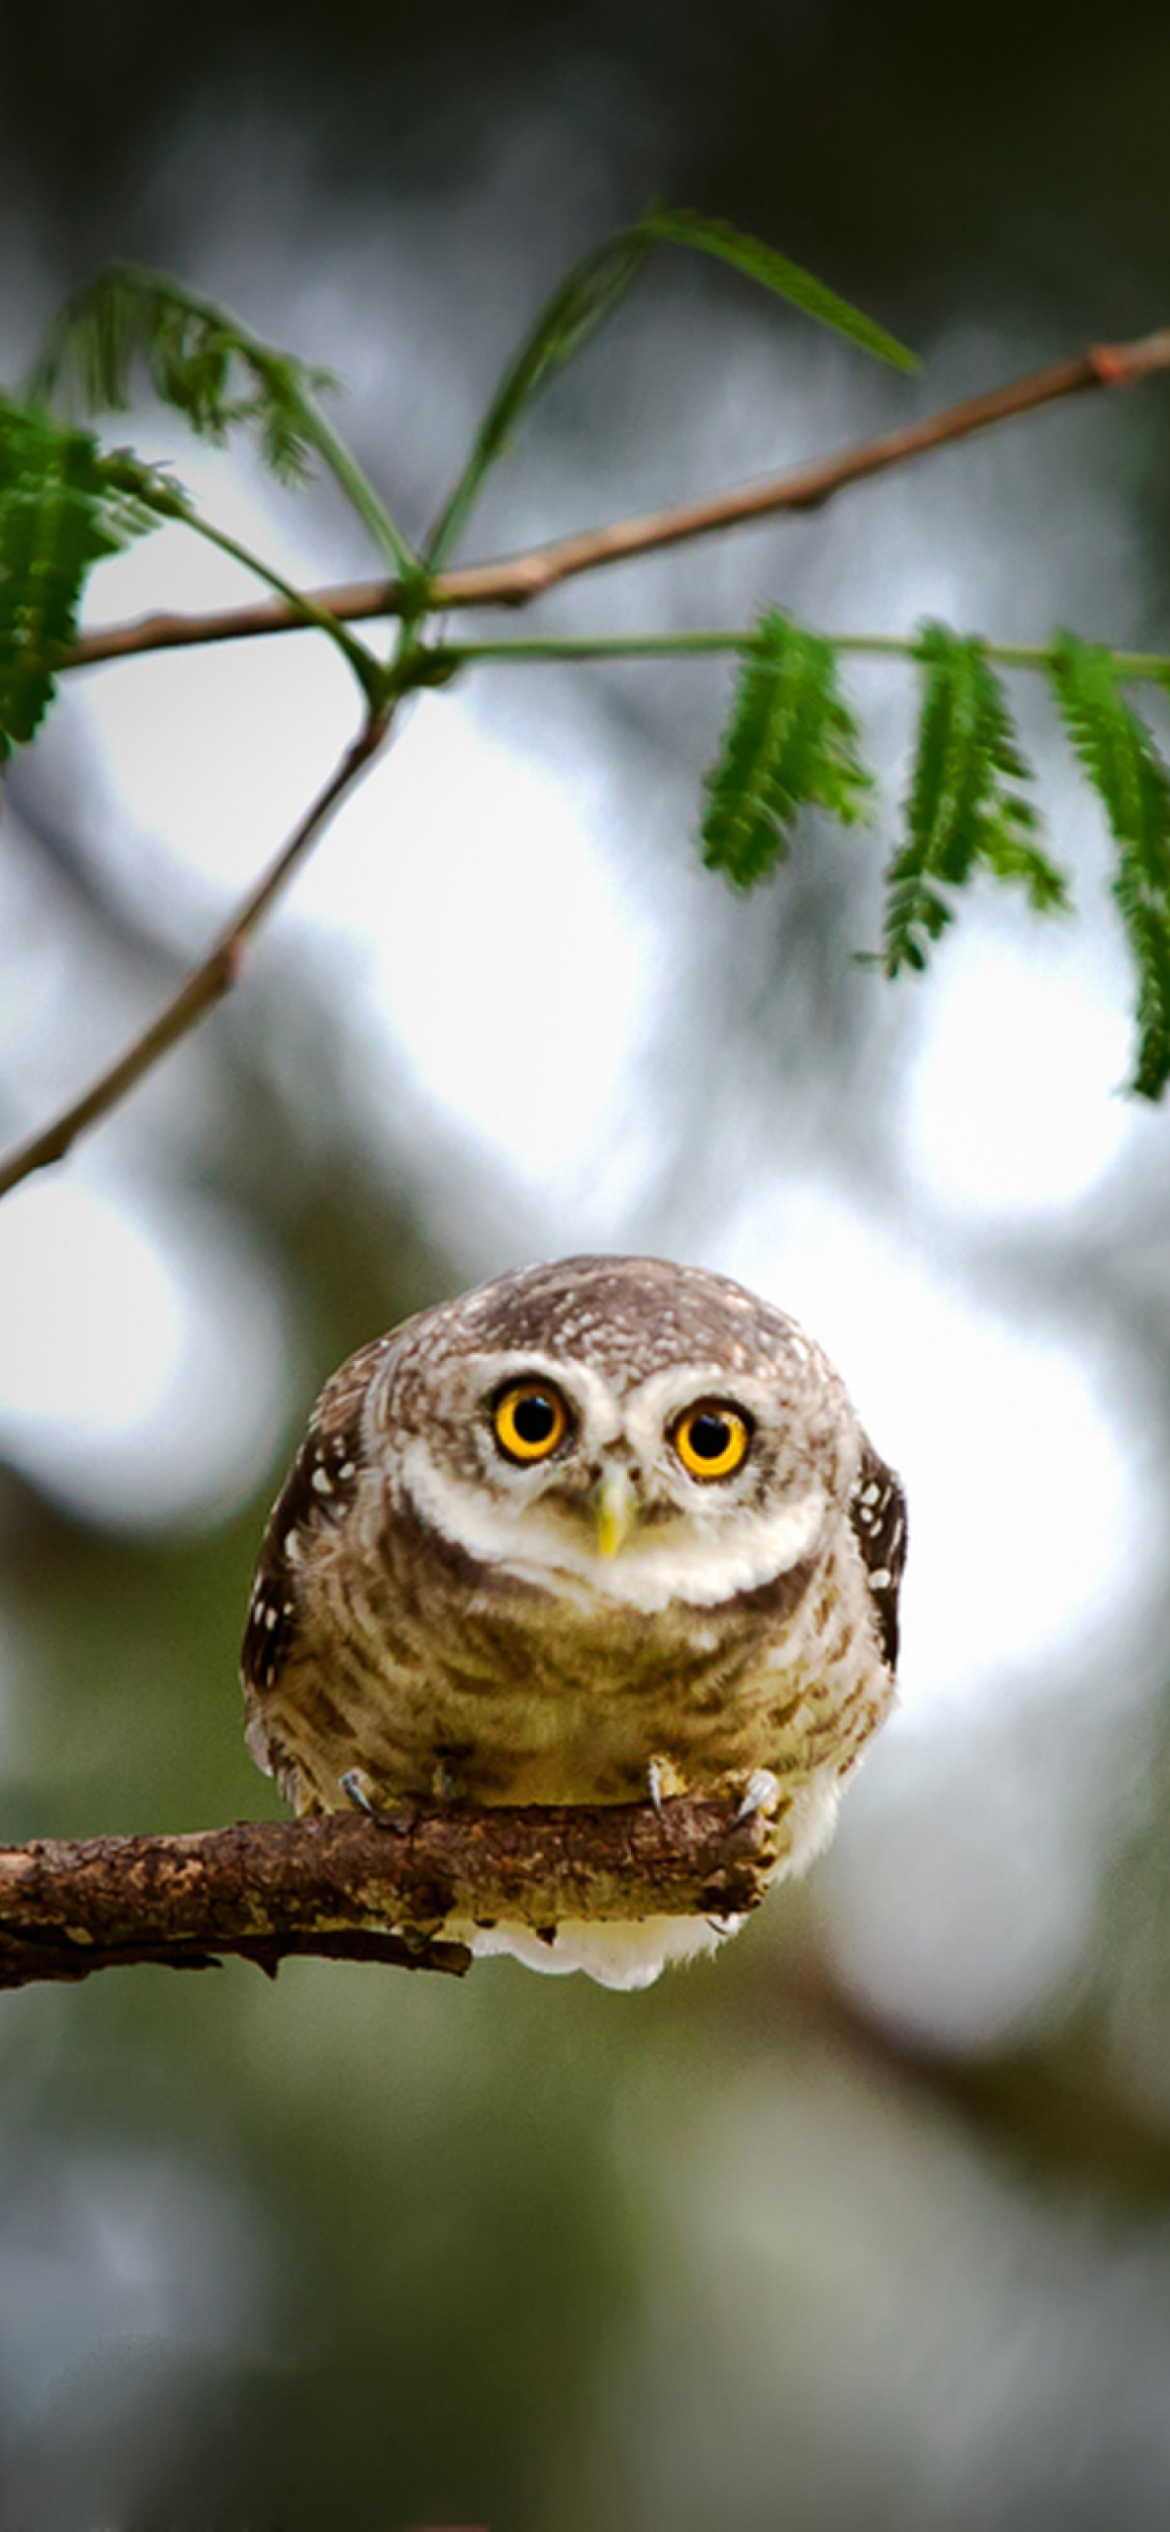 Cute And Funny Little Owl With Big Eyes wallpaper 1170x2532